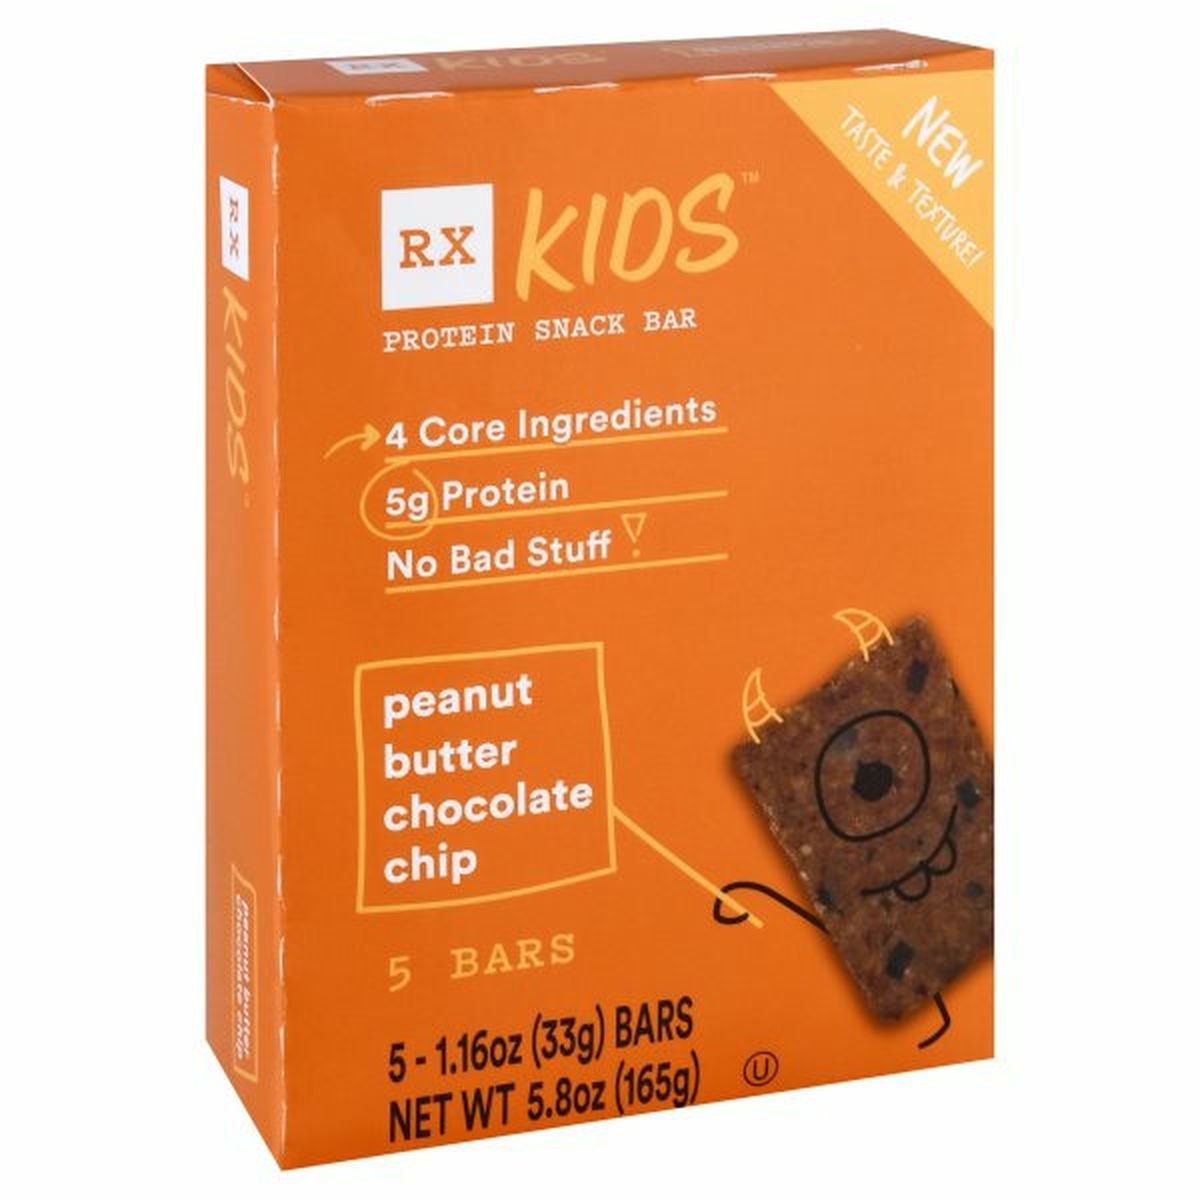 Calories in RXBAR RX Kids Protein Snack Bar, Peanut Butter Chocolate Chip